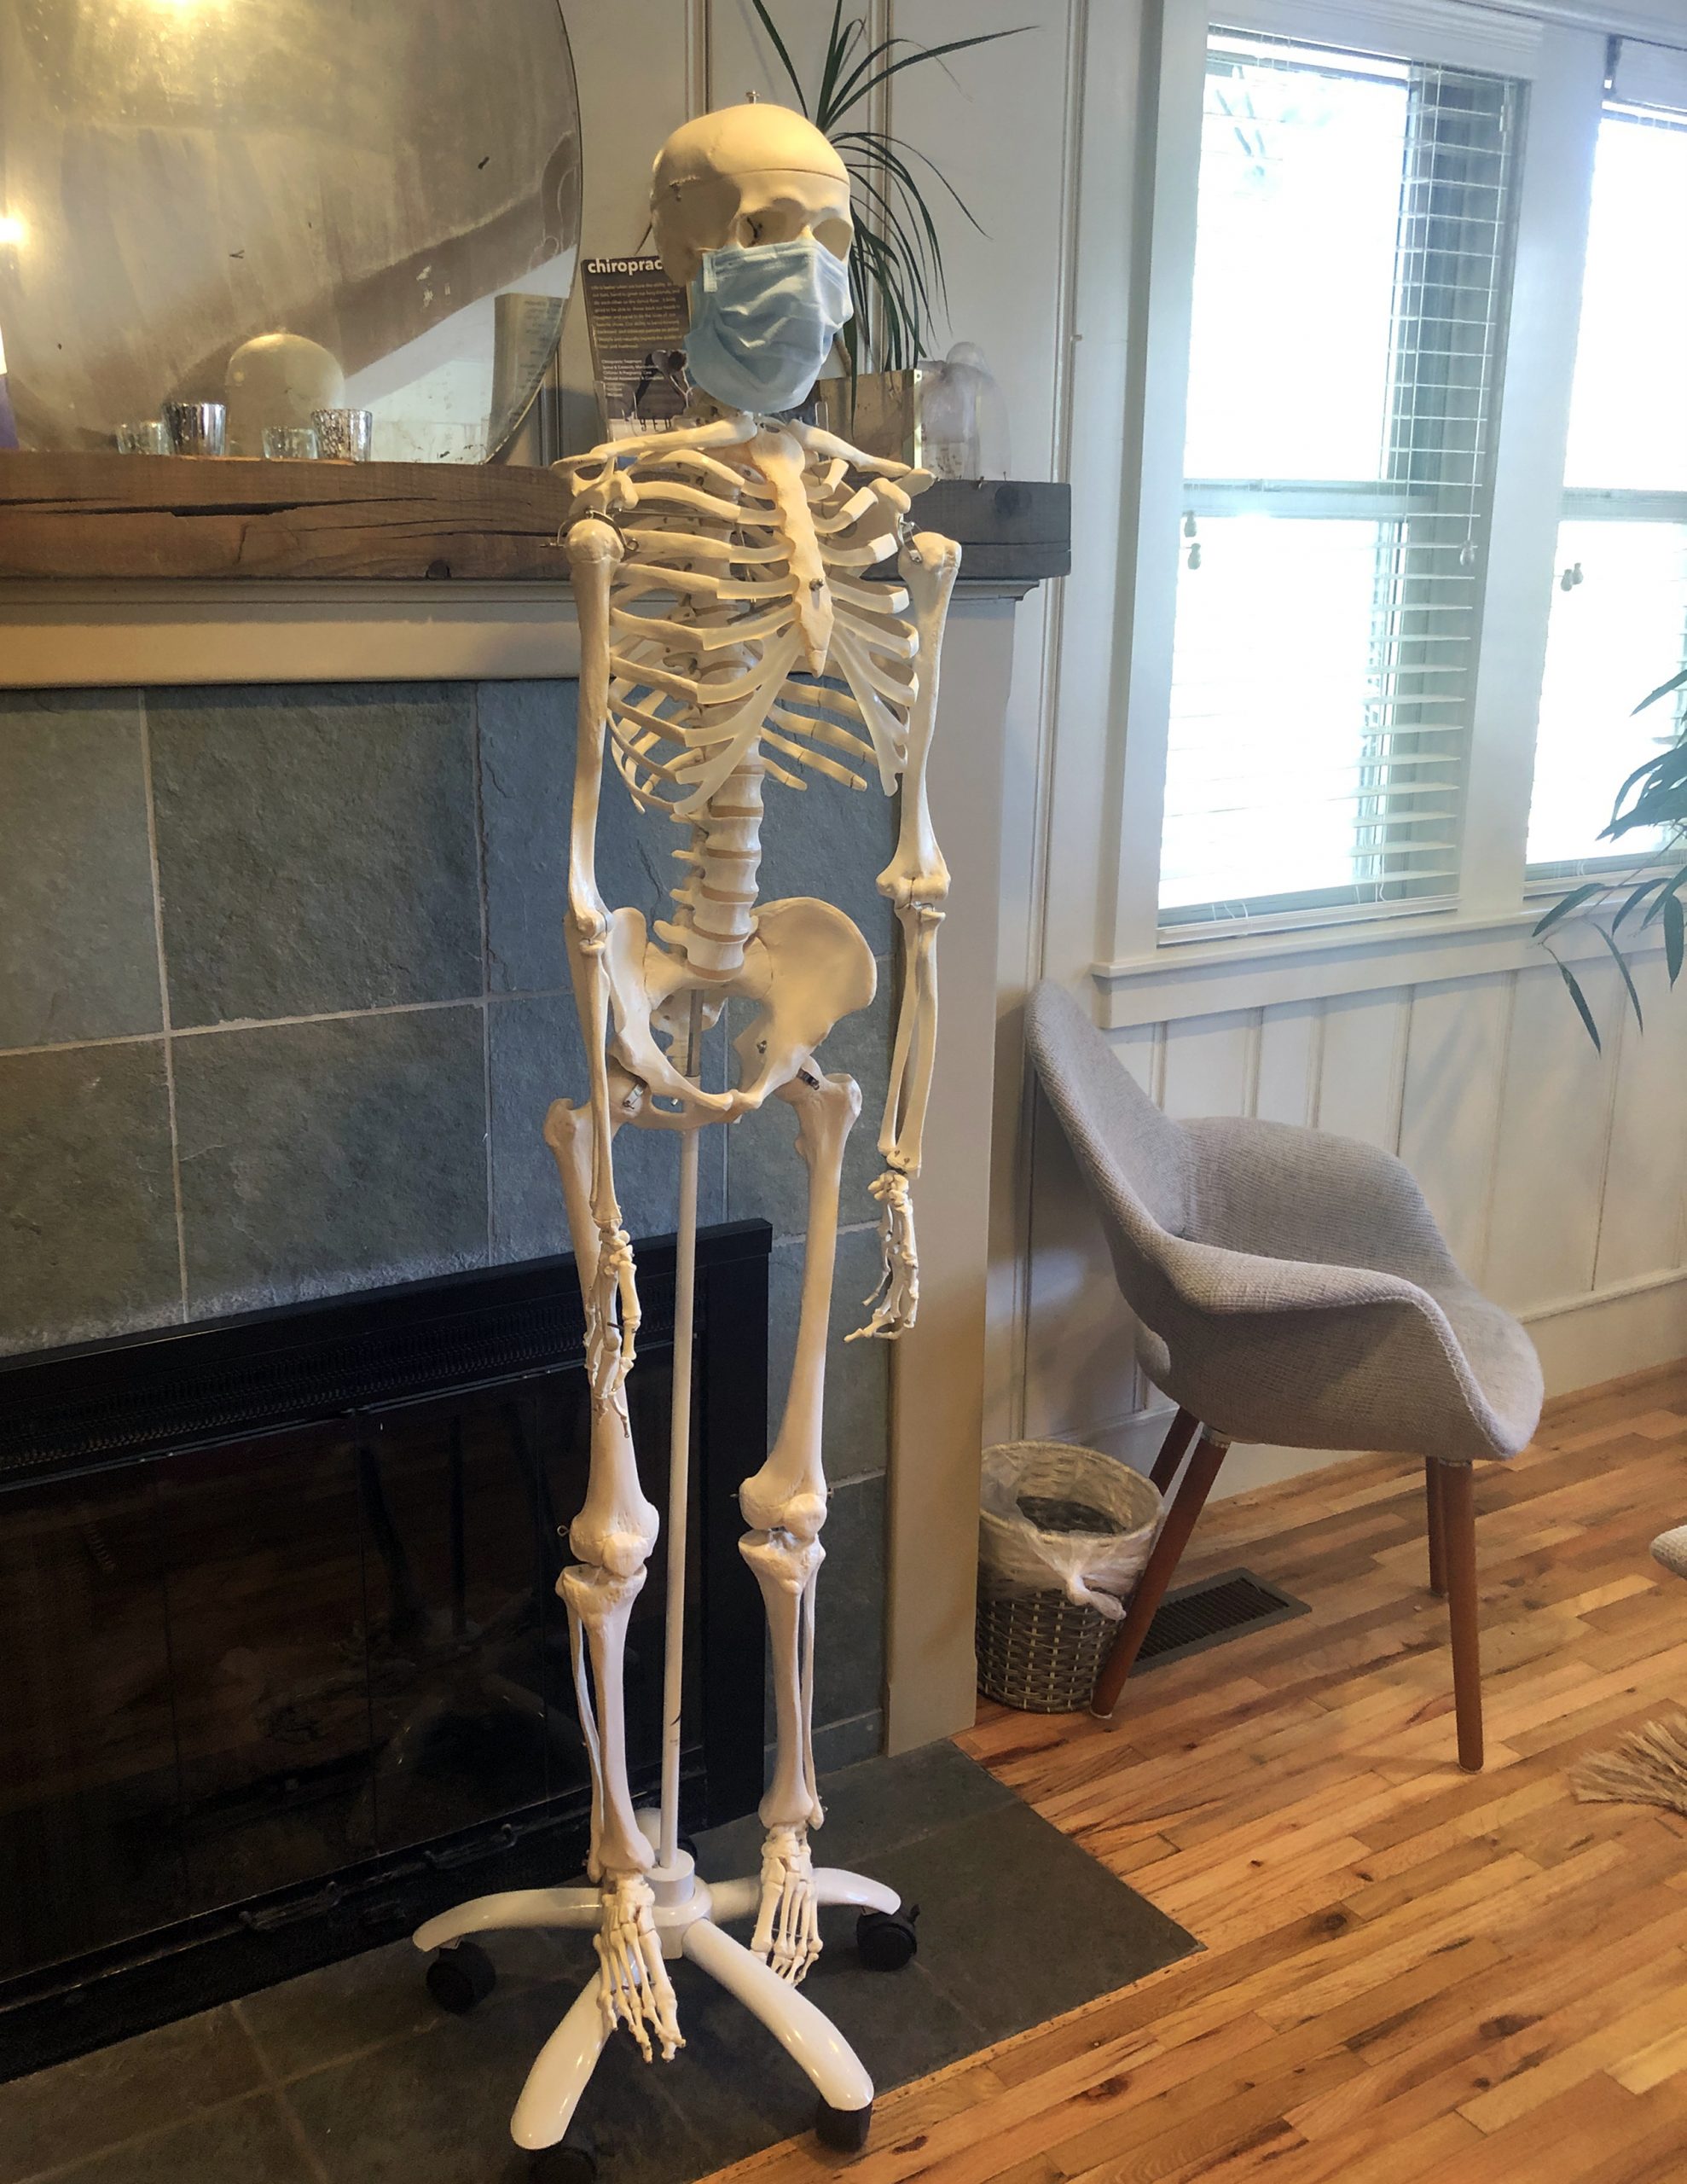 The Bend Chiropractic at Whitefish